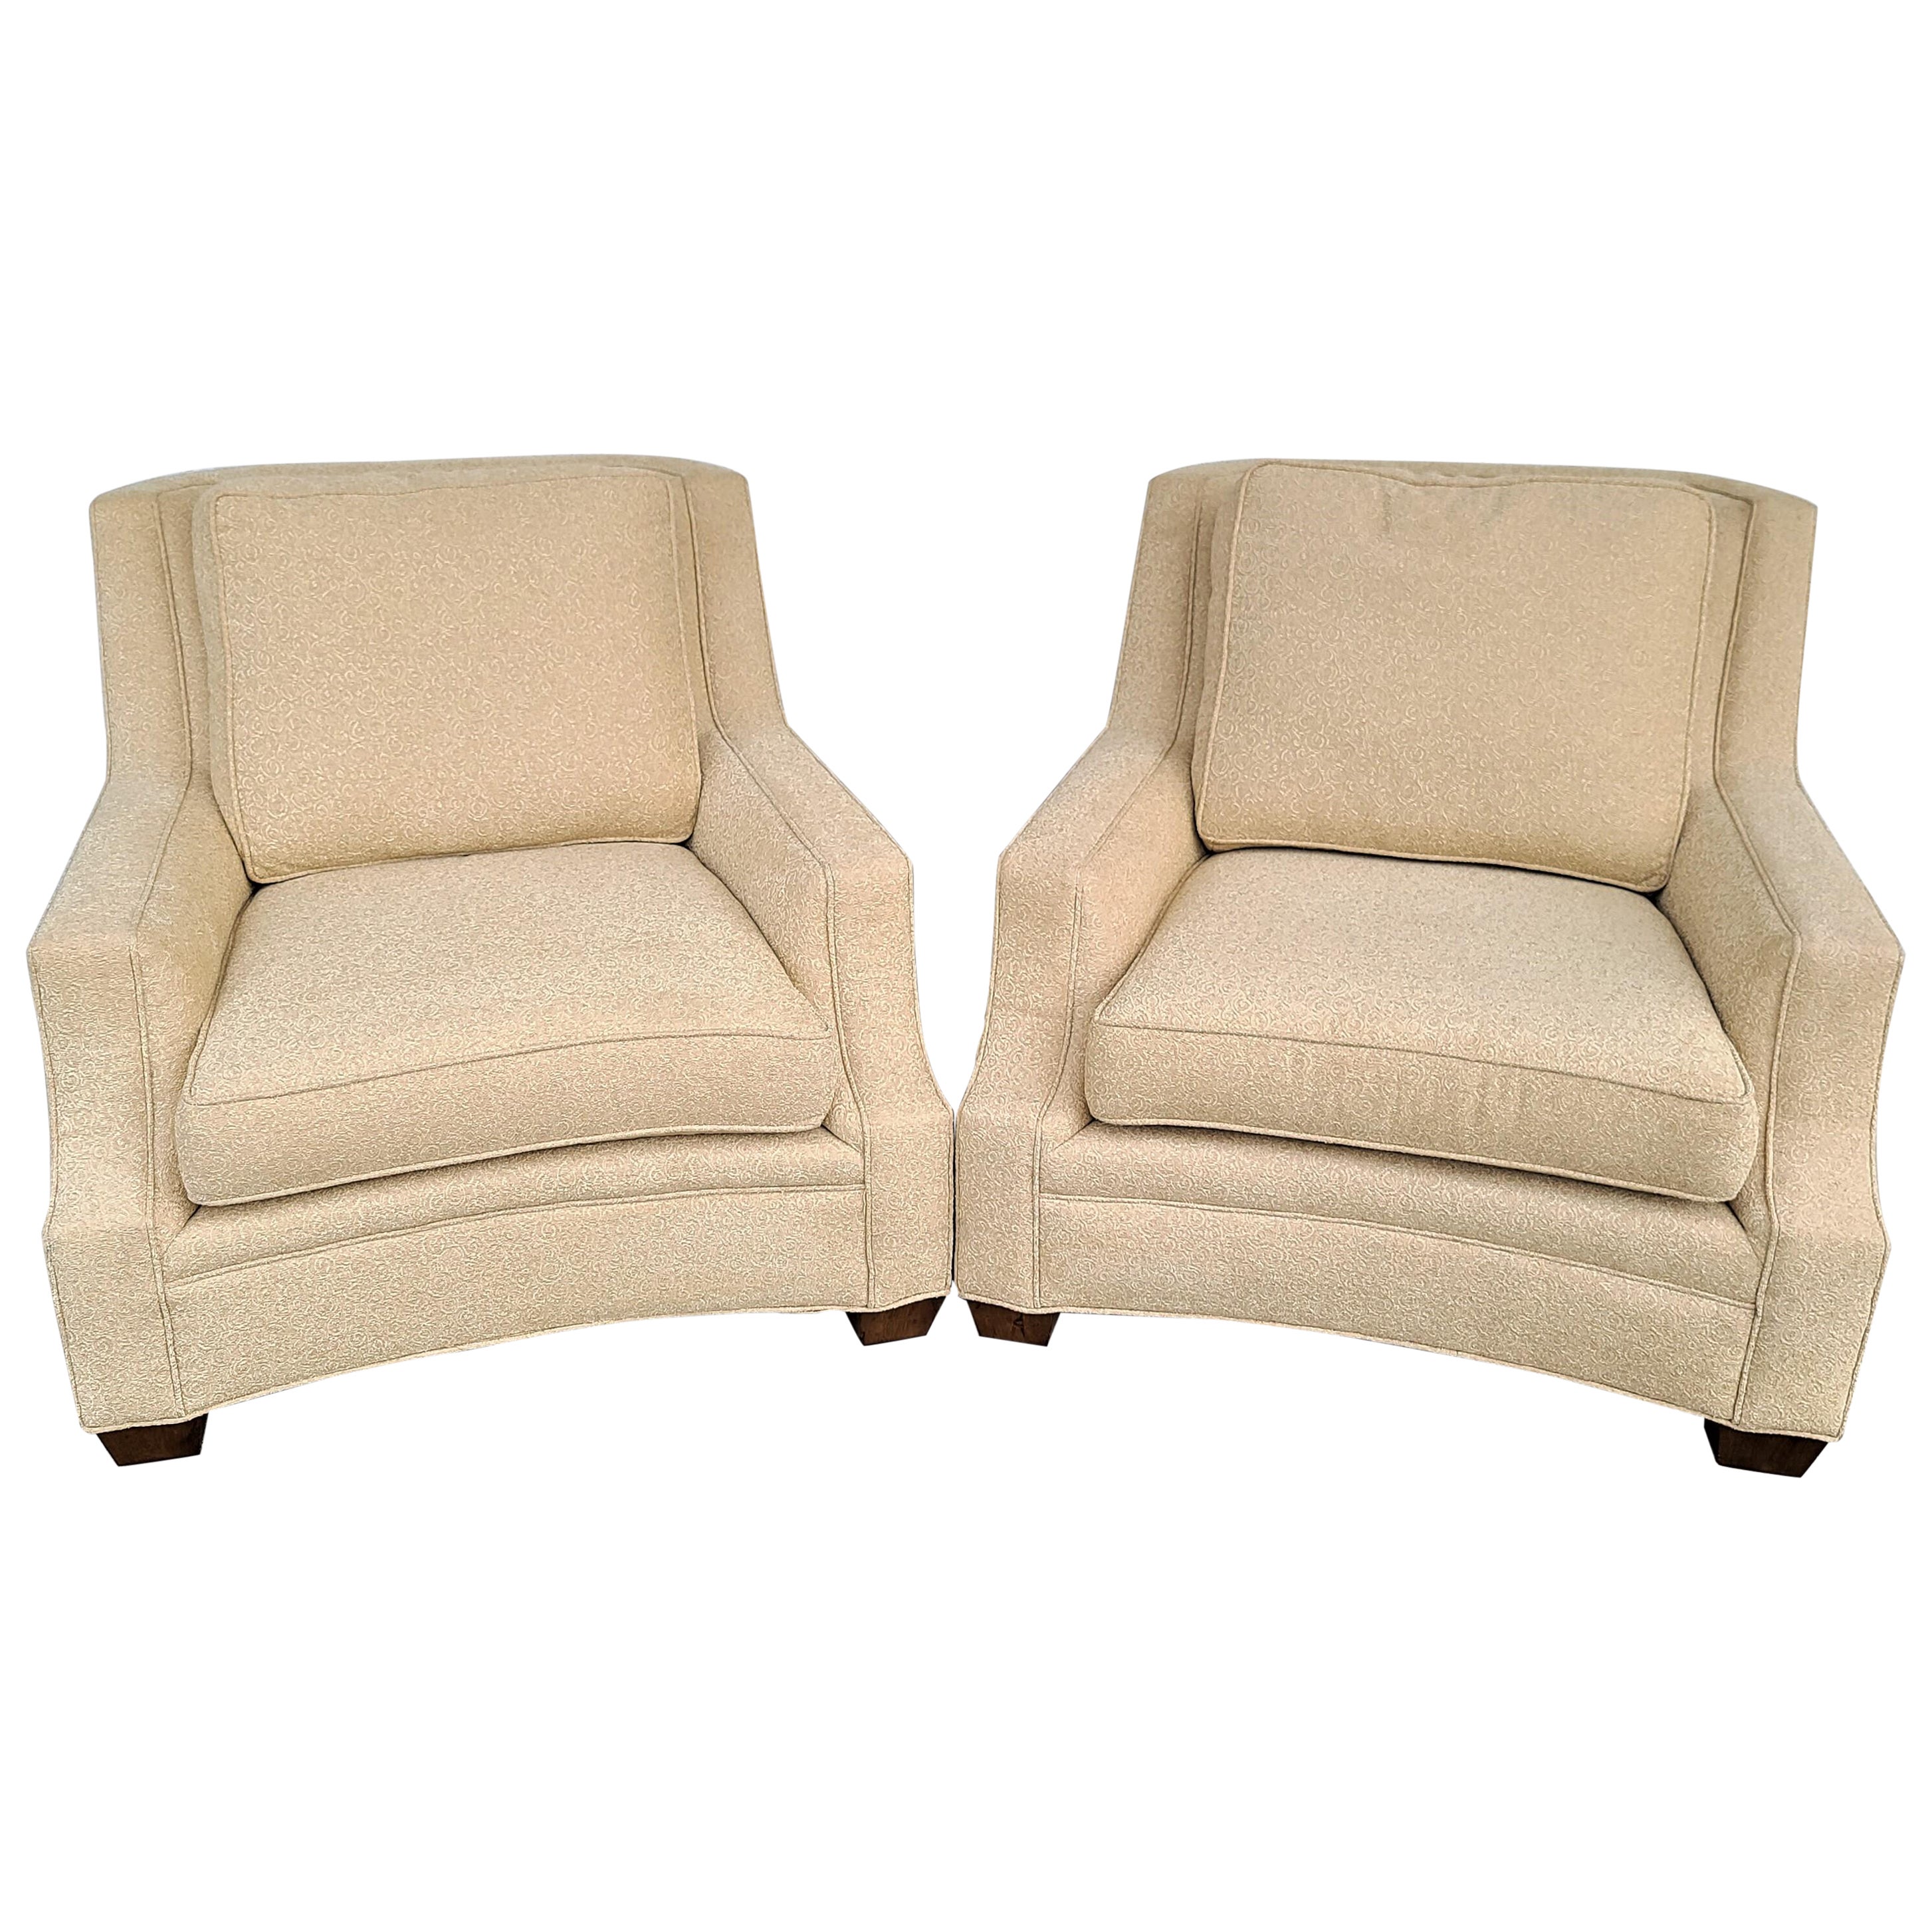 Oversized Beige Lounge Chairs by Century Furniture Co - A Pair